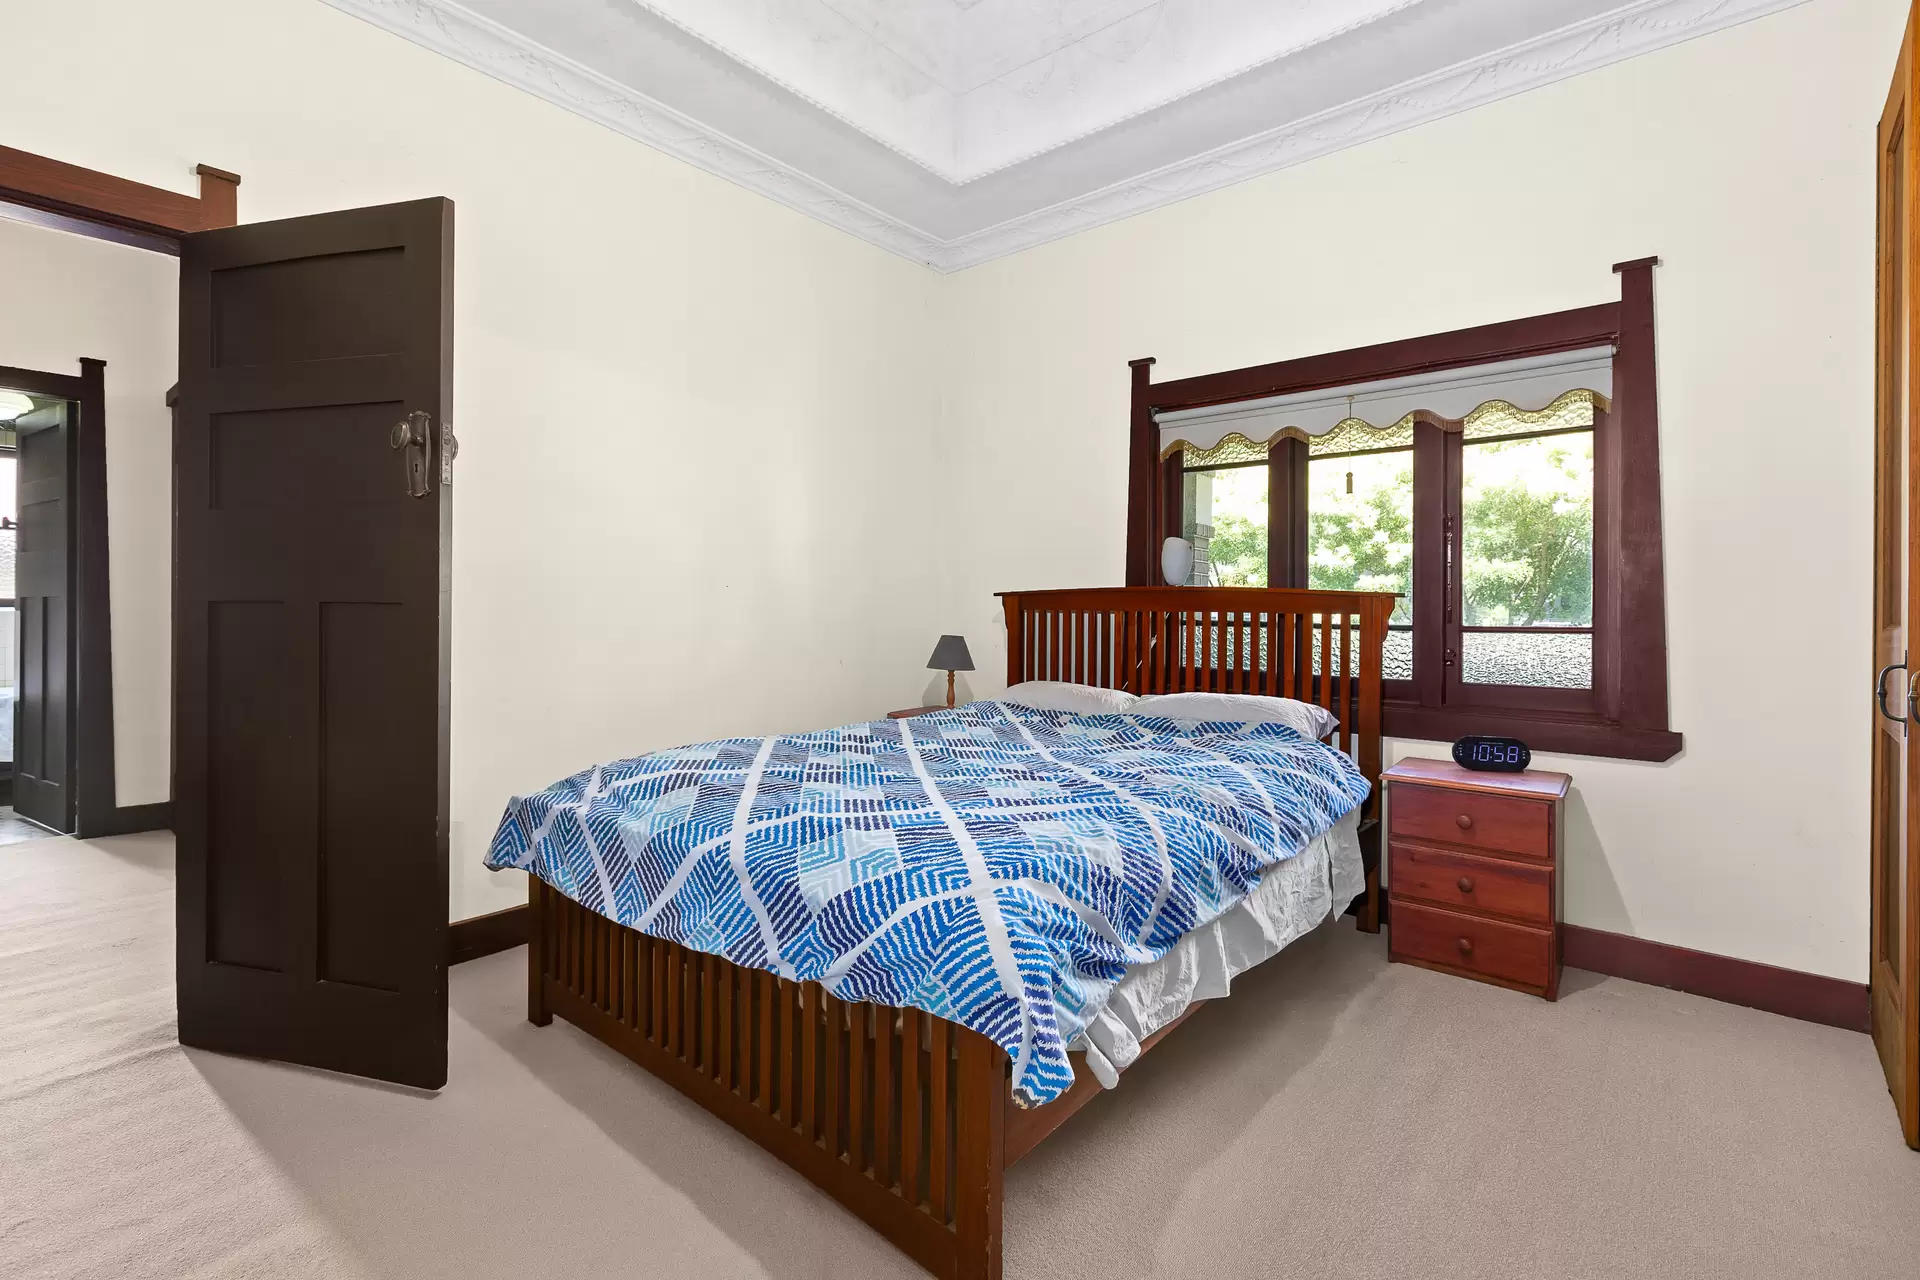 12 See Street, Meadowbank Auction by Cassidy Real Estate - image 1